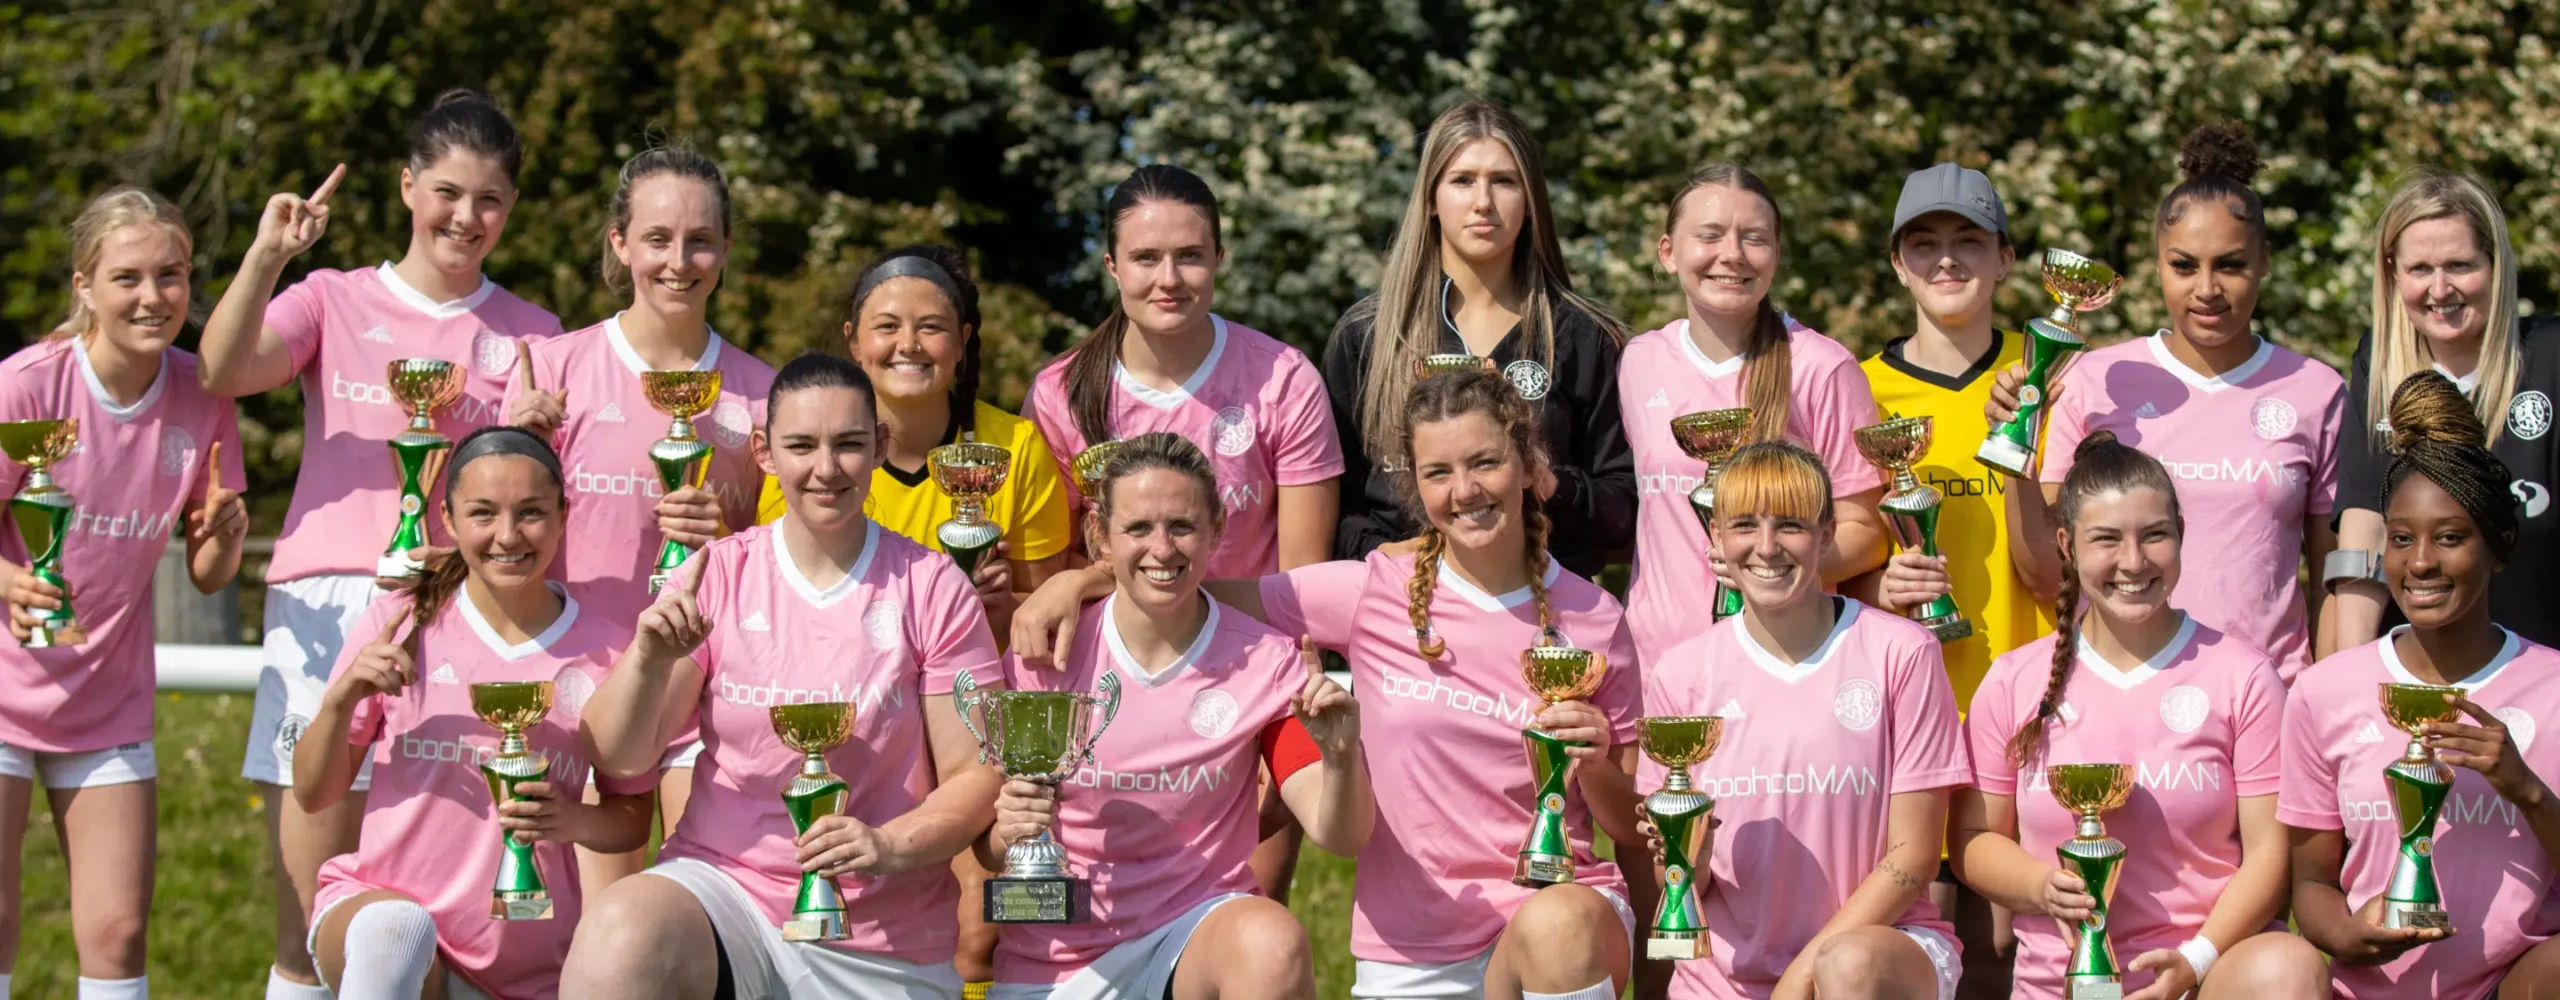 WOMENS FIRST TEAM CROWNED LEAGUE CUP CHAMPIONS!!!!